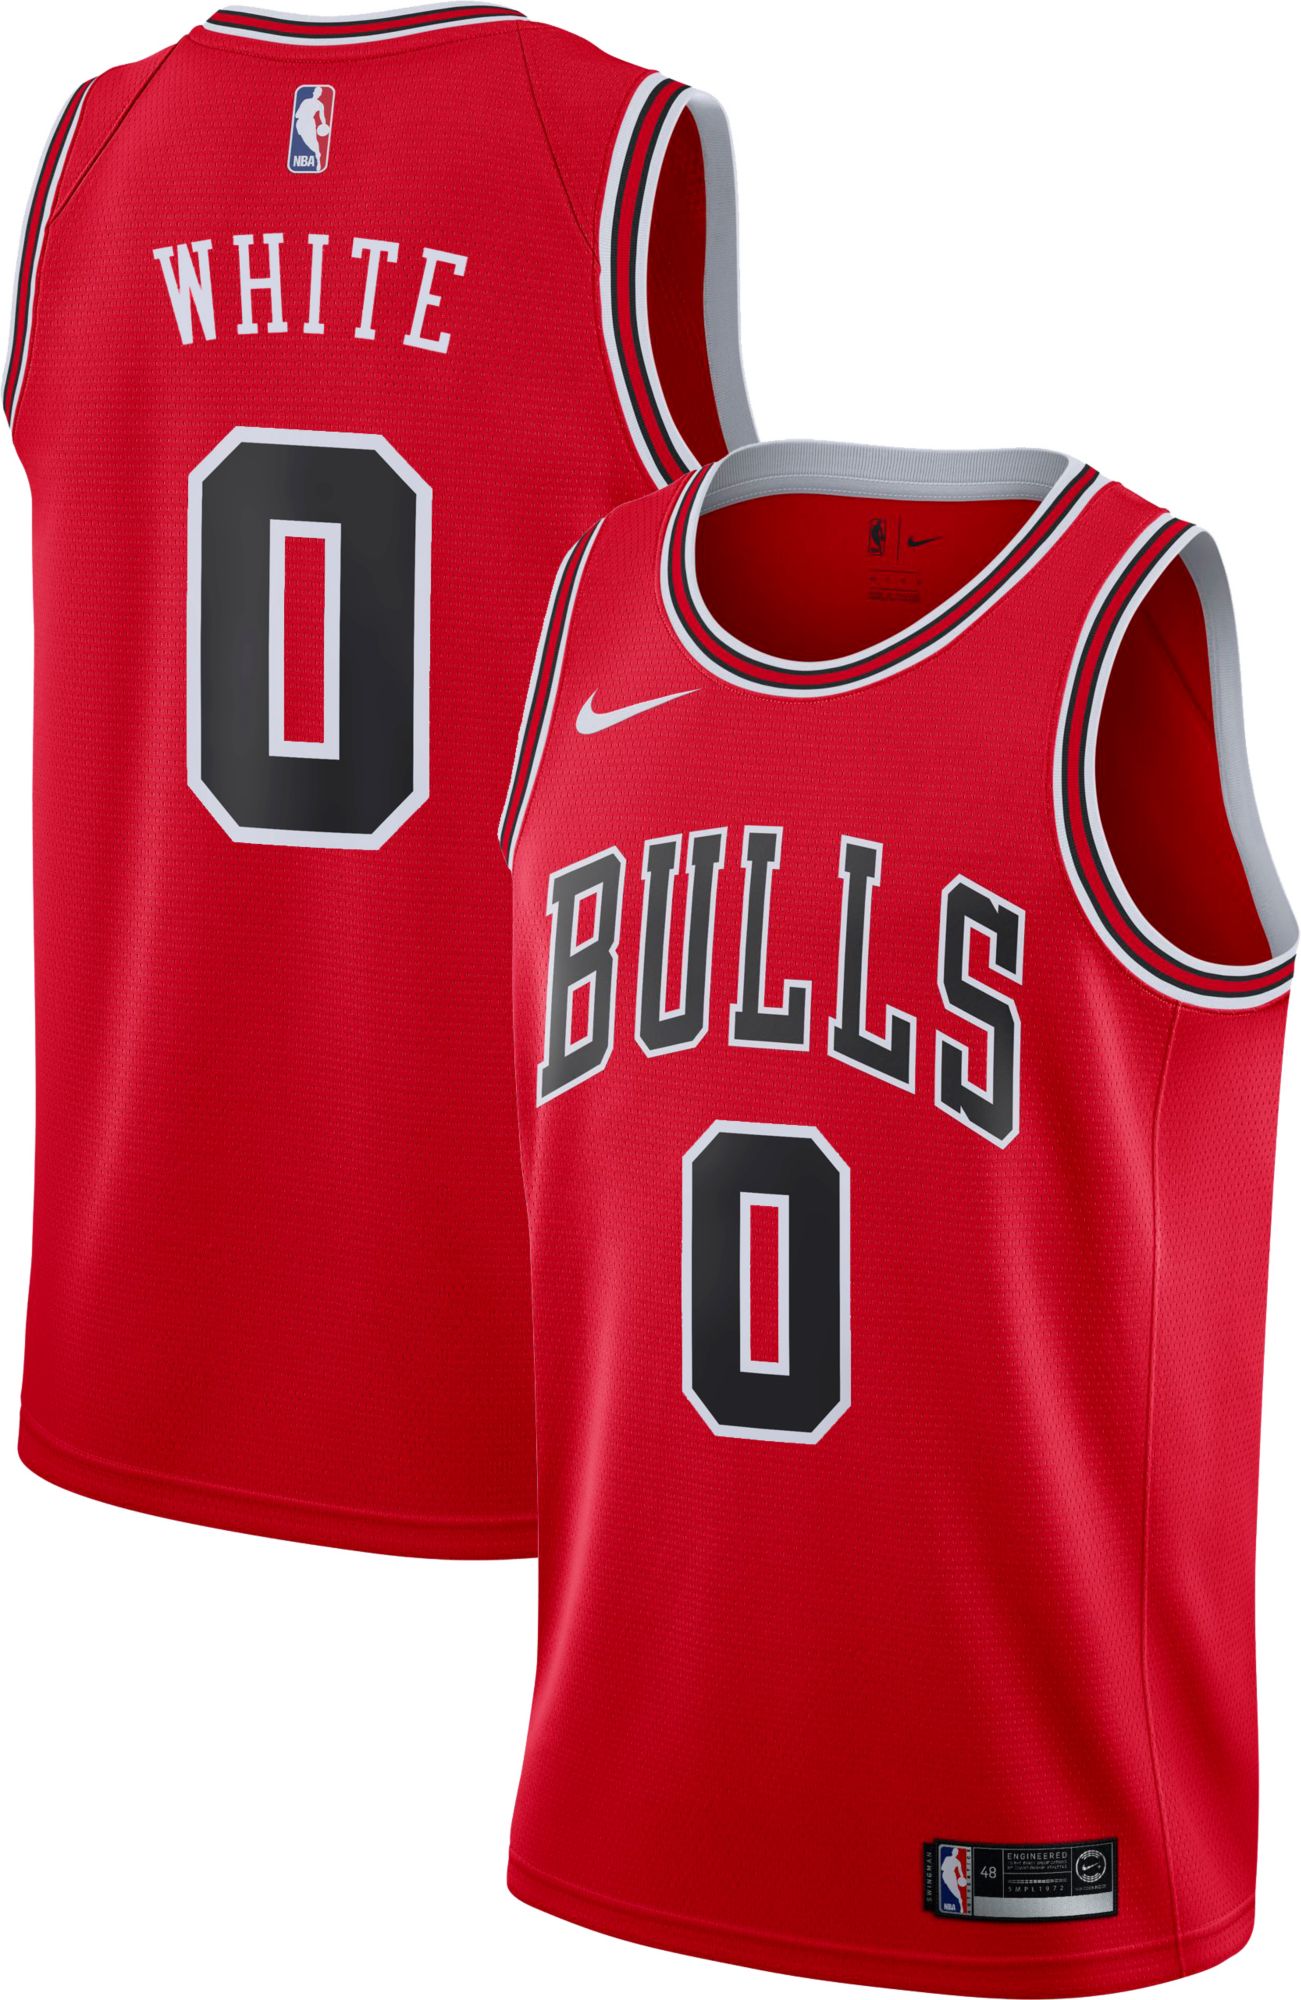 chicago bulls jersey red